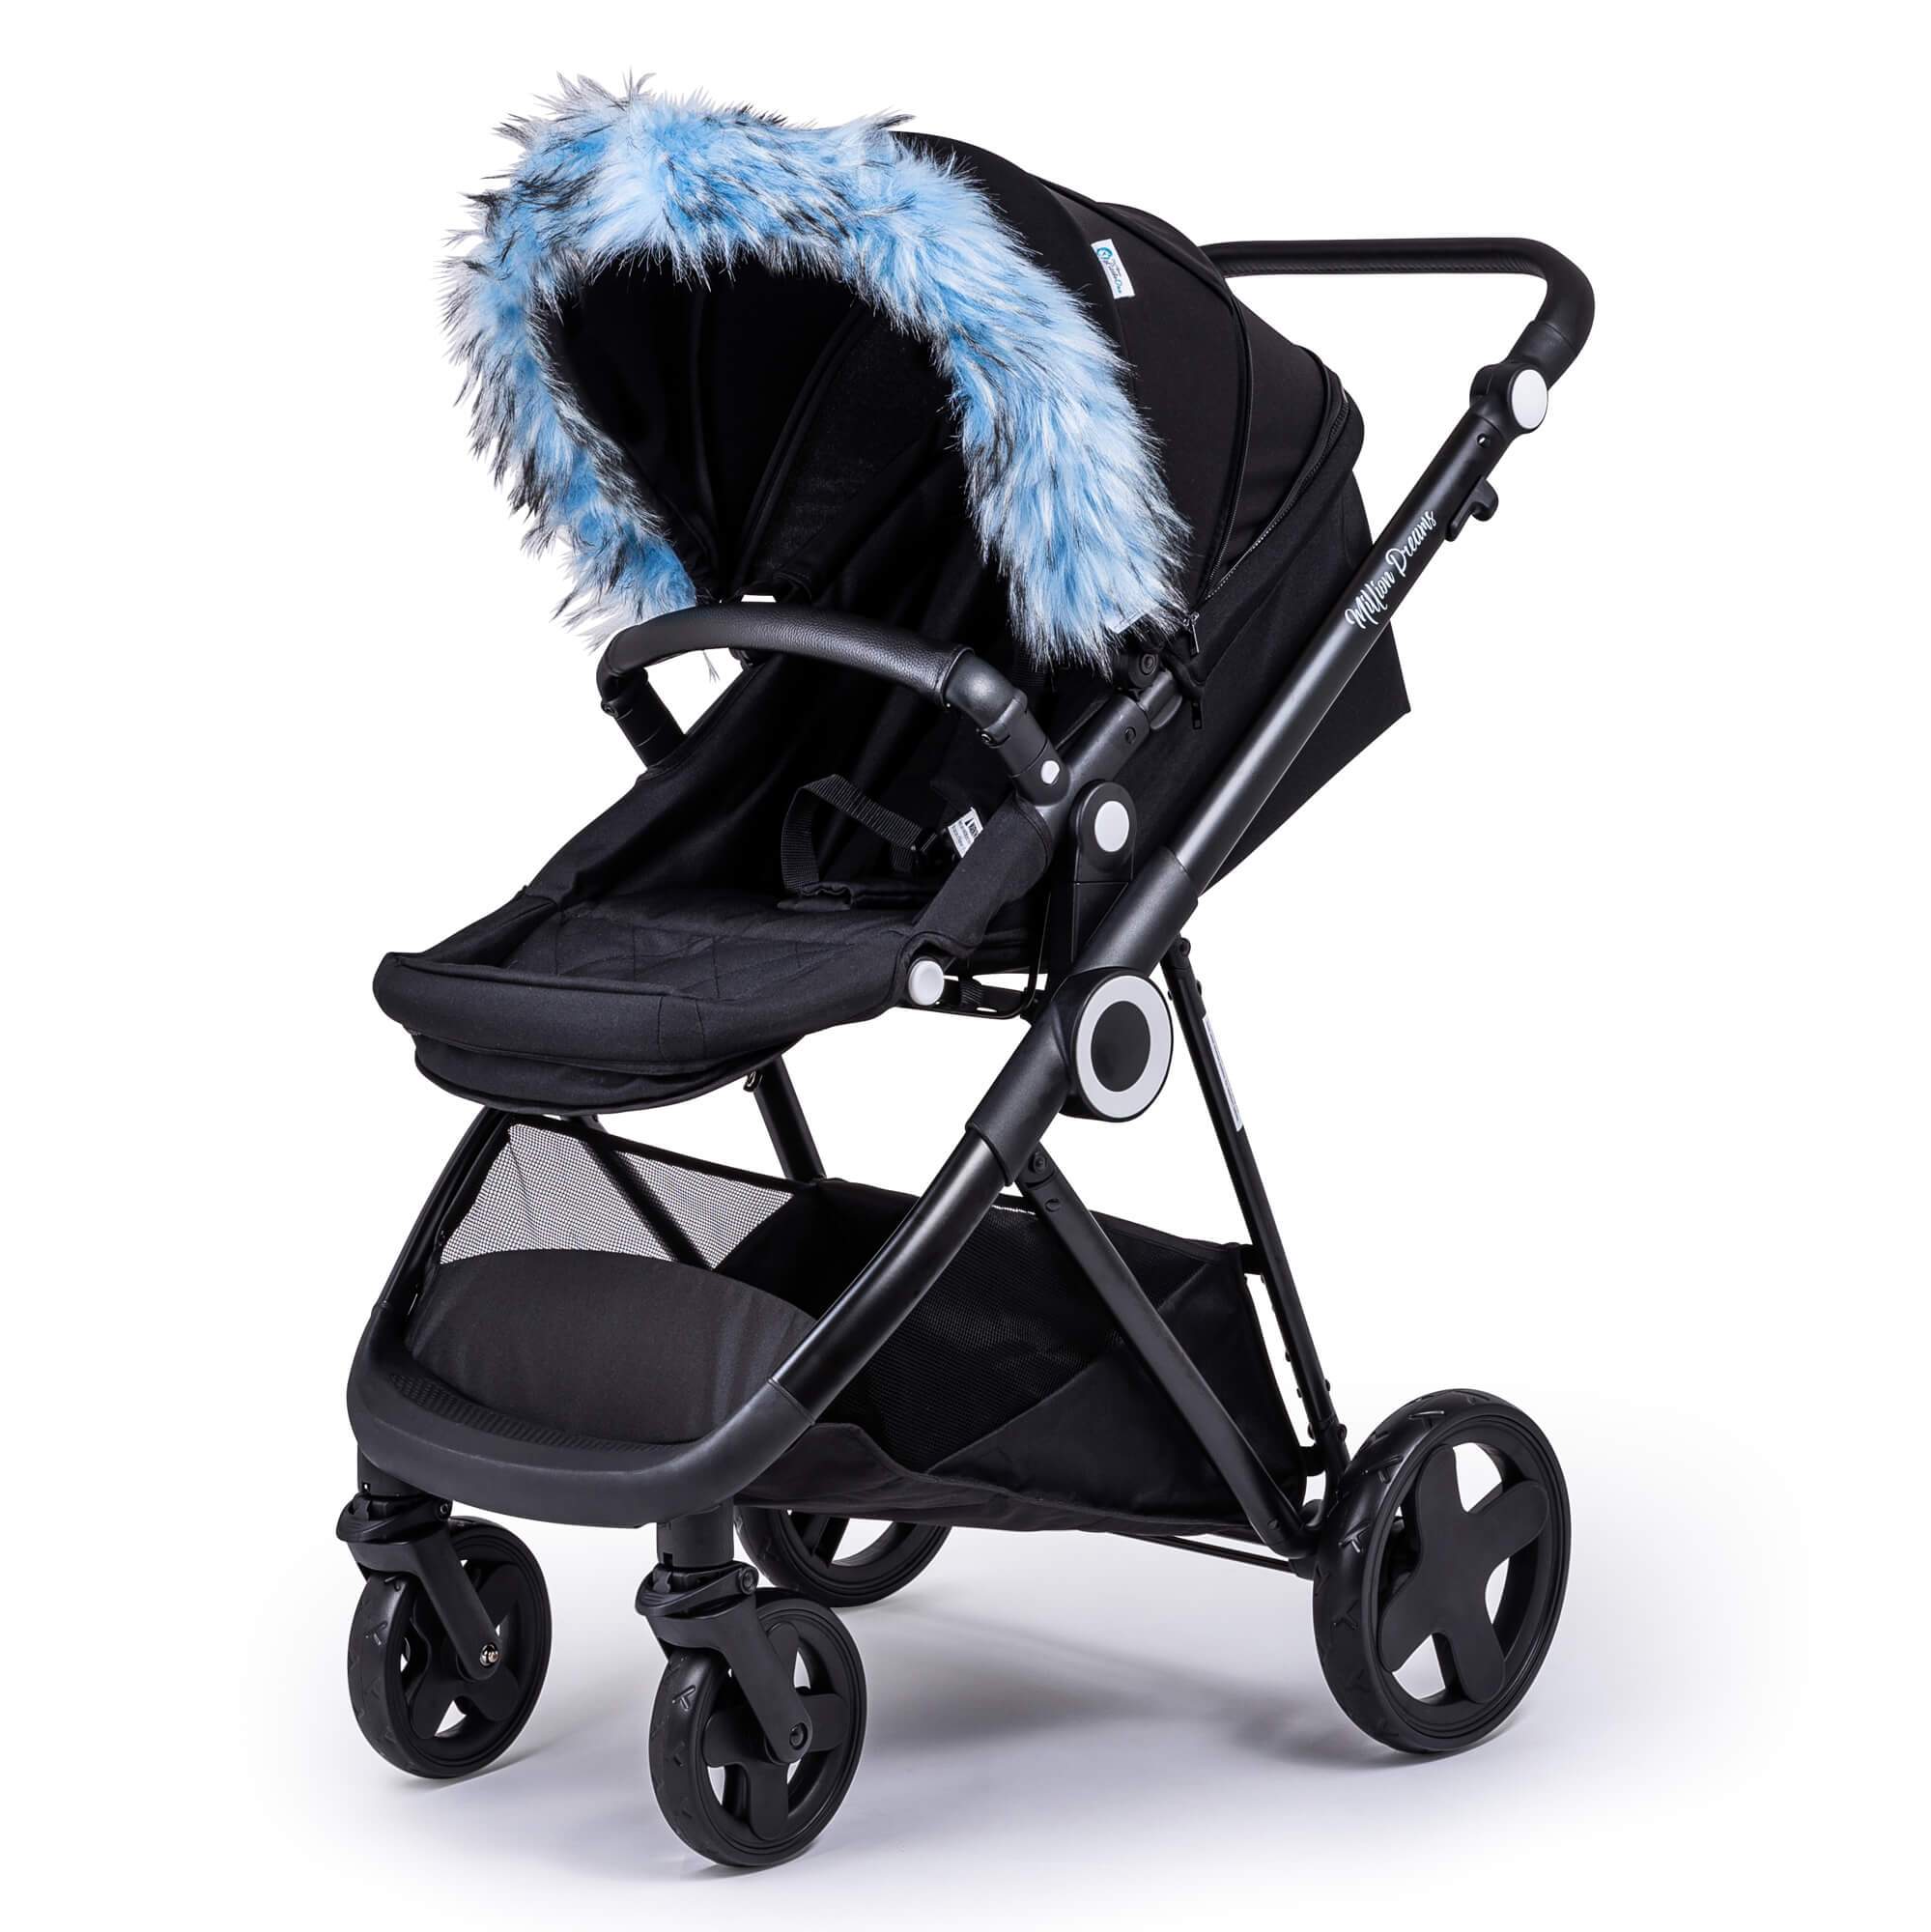 Pram Fur Hood Trim Attachment for Pushchair Compatible with I'coo - Light Blue / Fits All Models | For Your Little One